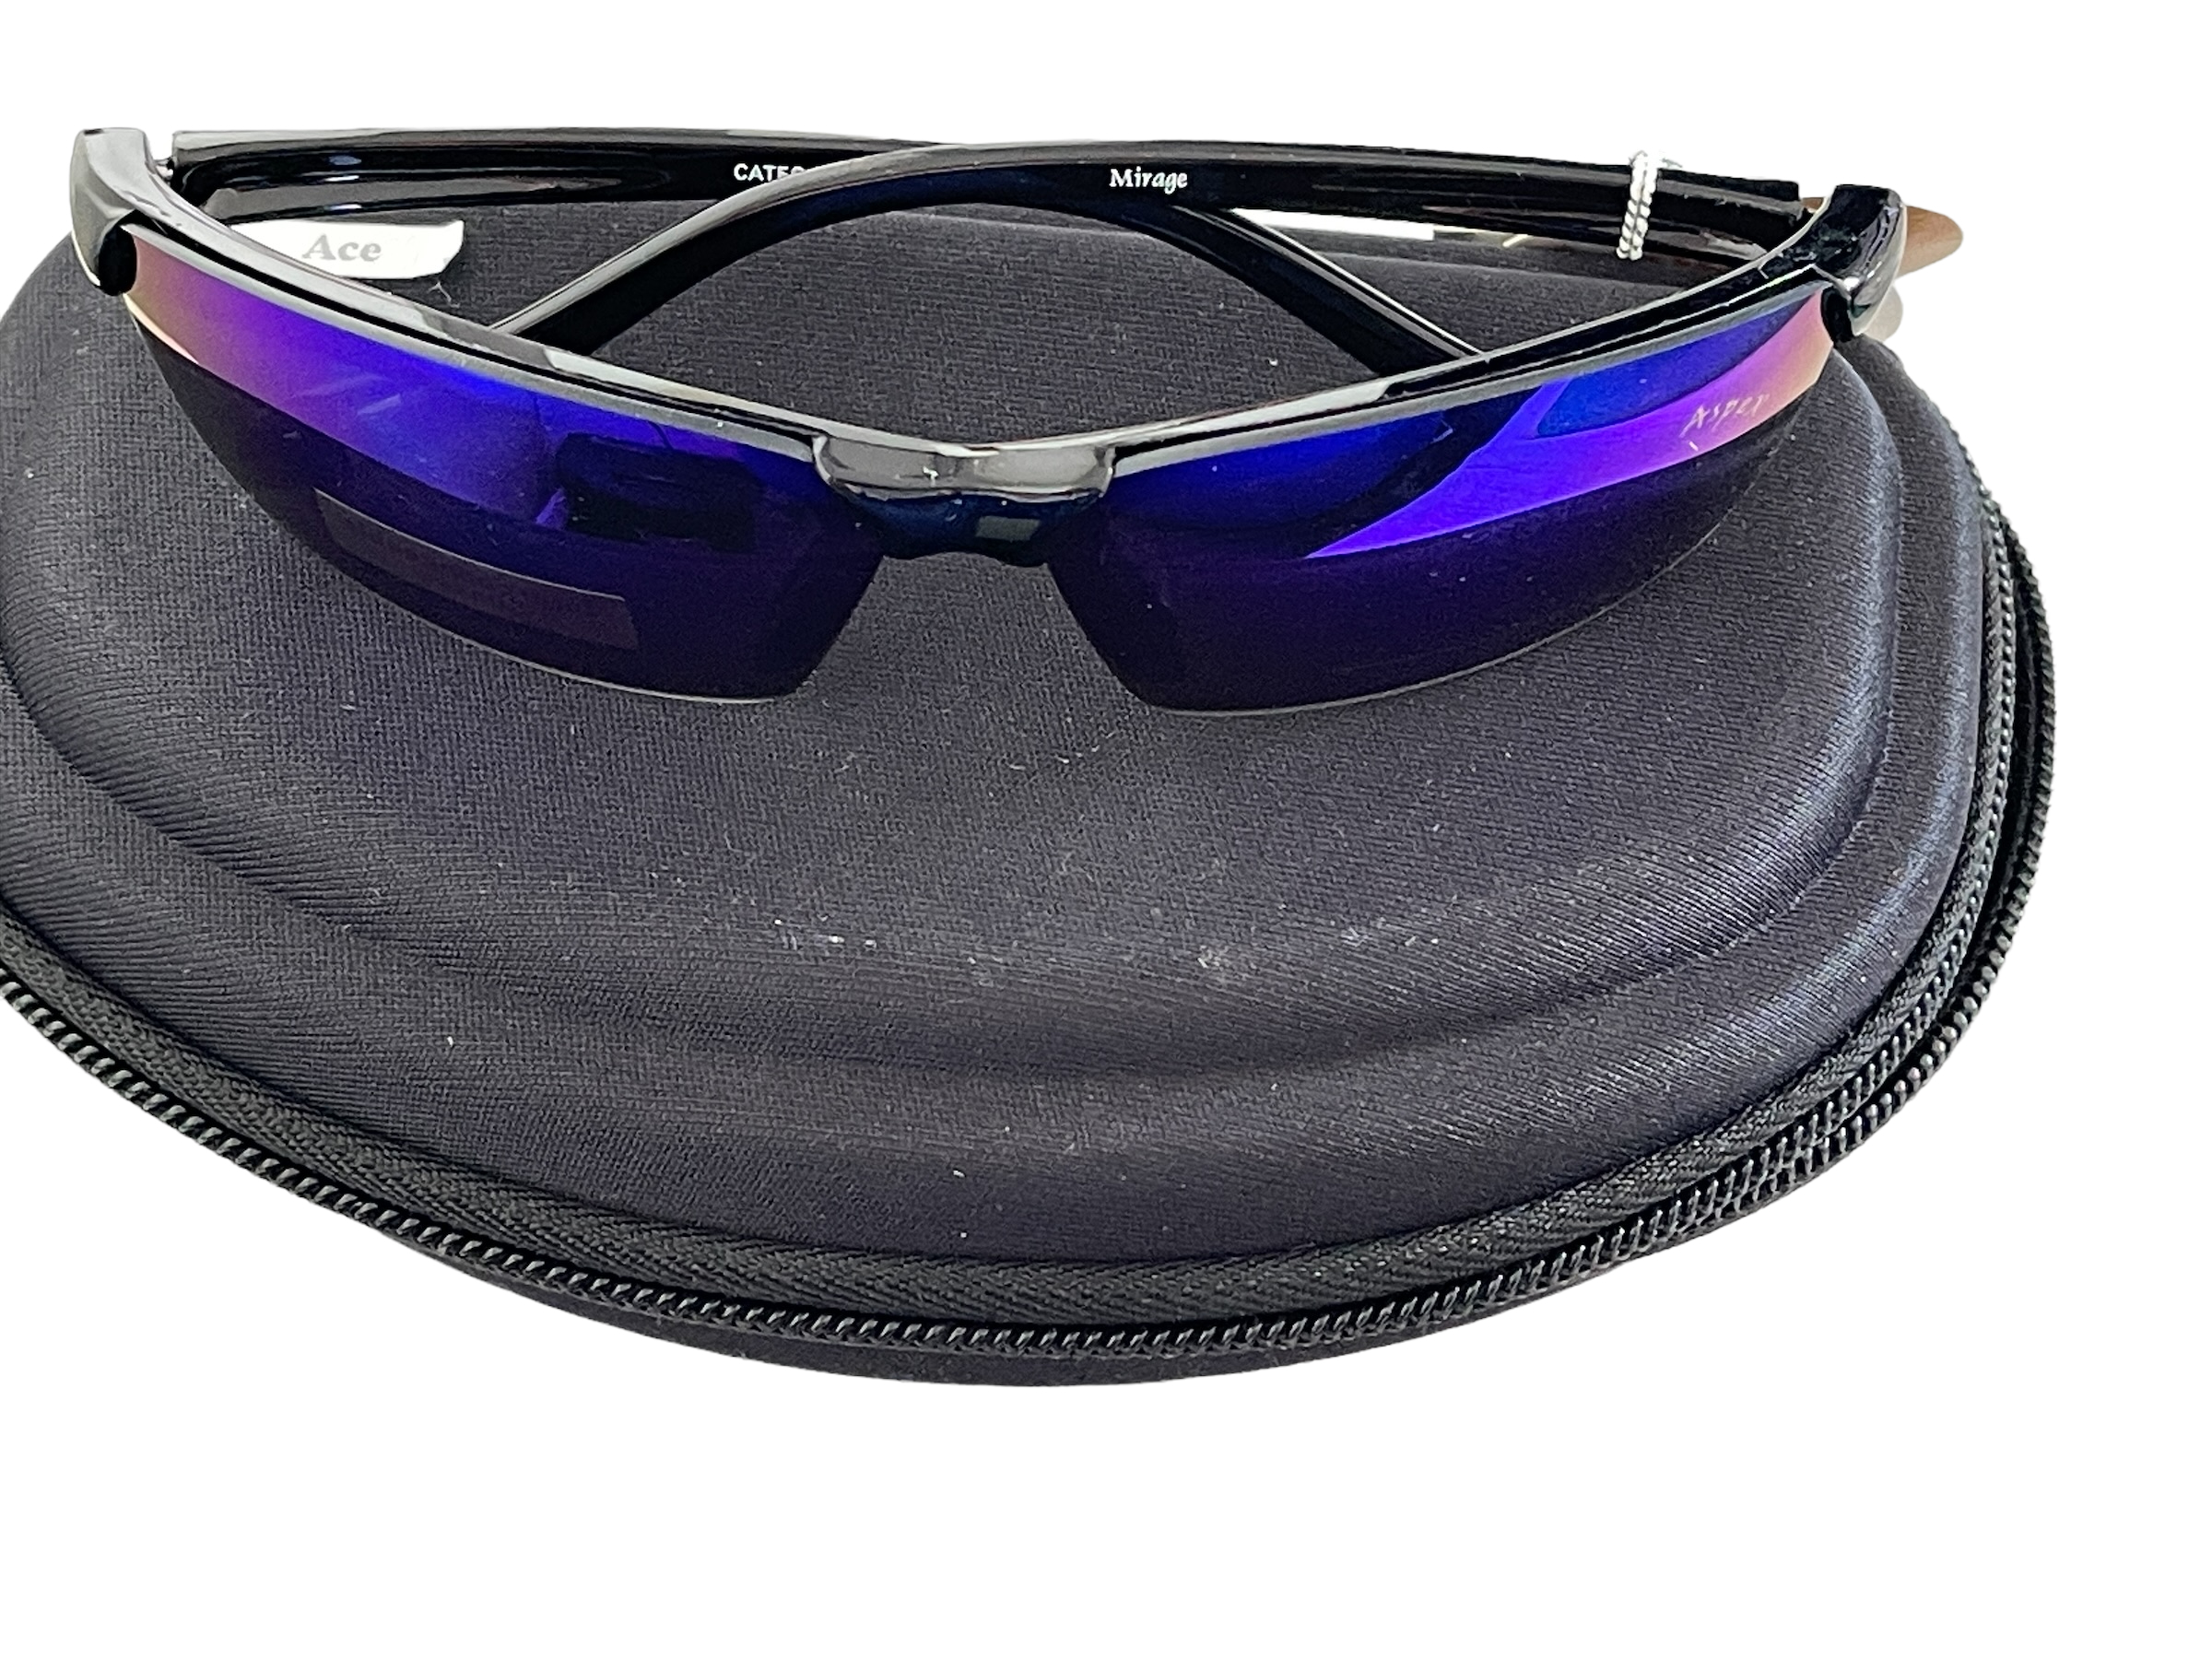 Aspex Sunglasses with Case Cloth Lenses Surplus Stock from Our private jet charter. - Image 4 of 5